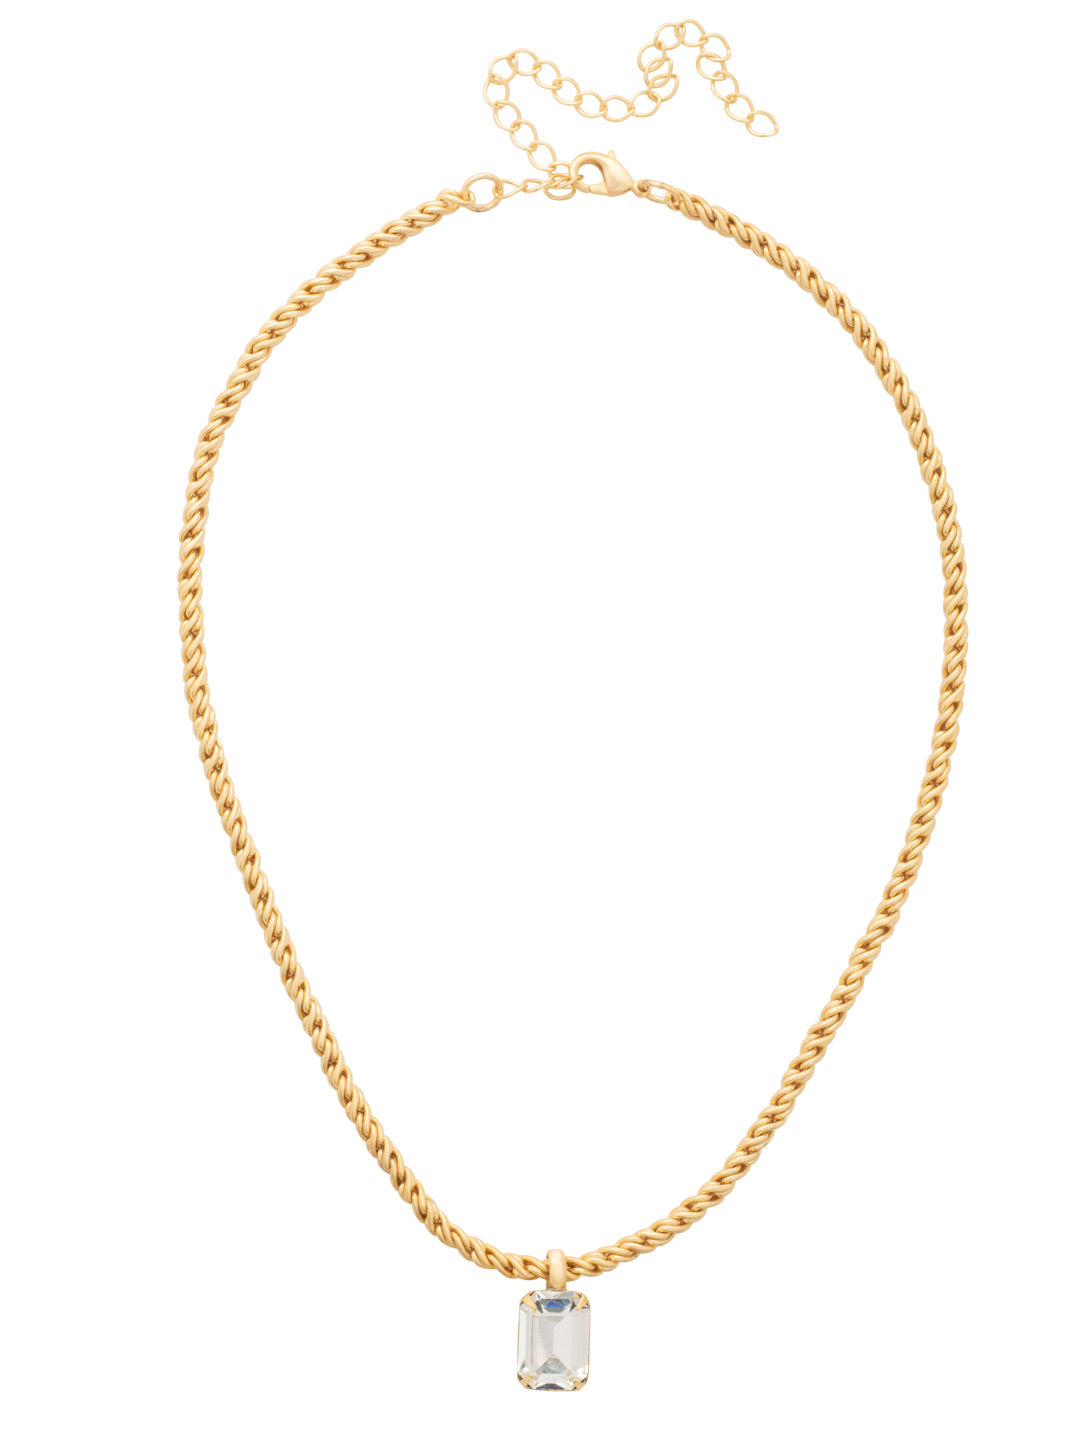 Emerald Rope Chain Pendant Necklace - NCT110MGCRY - <p>The Emerald Rope Chain Pendant Necklace features an emerald cut pendant on an adjustable rope chain, secured by a lobster claw clasp. From Sorrelli's Crystal collection in our Matte Gold-tone finish.</p>